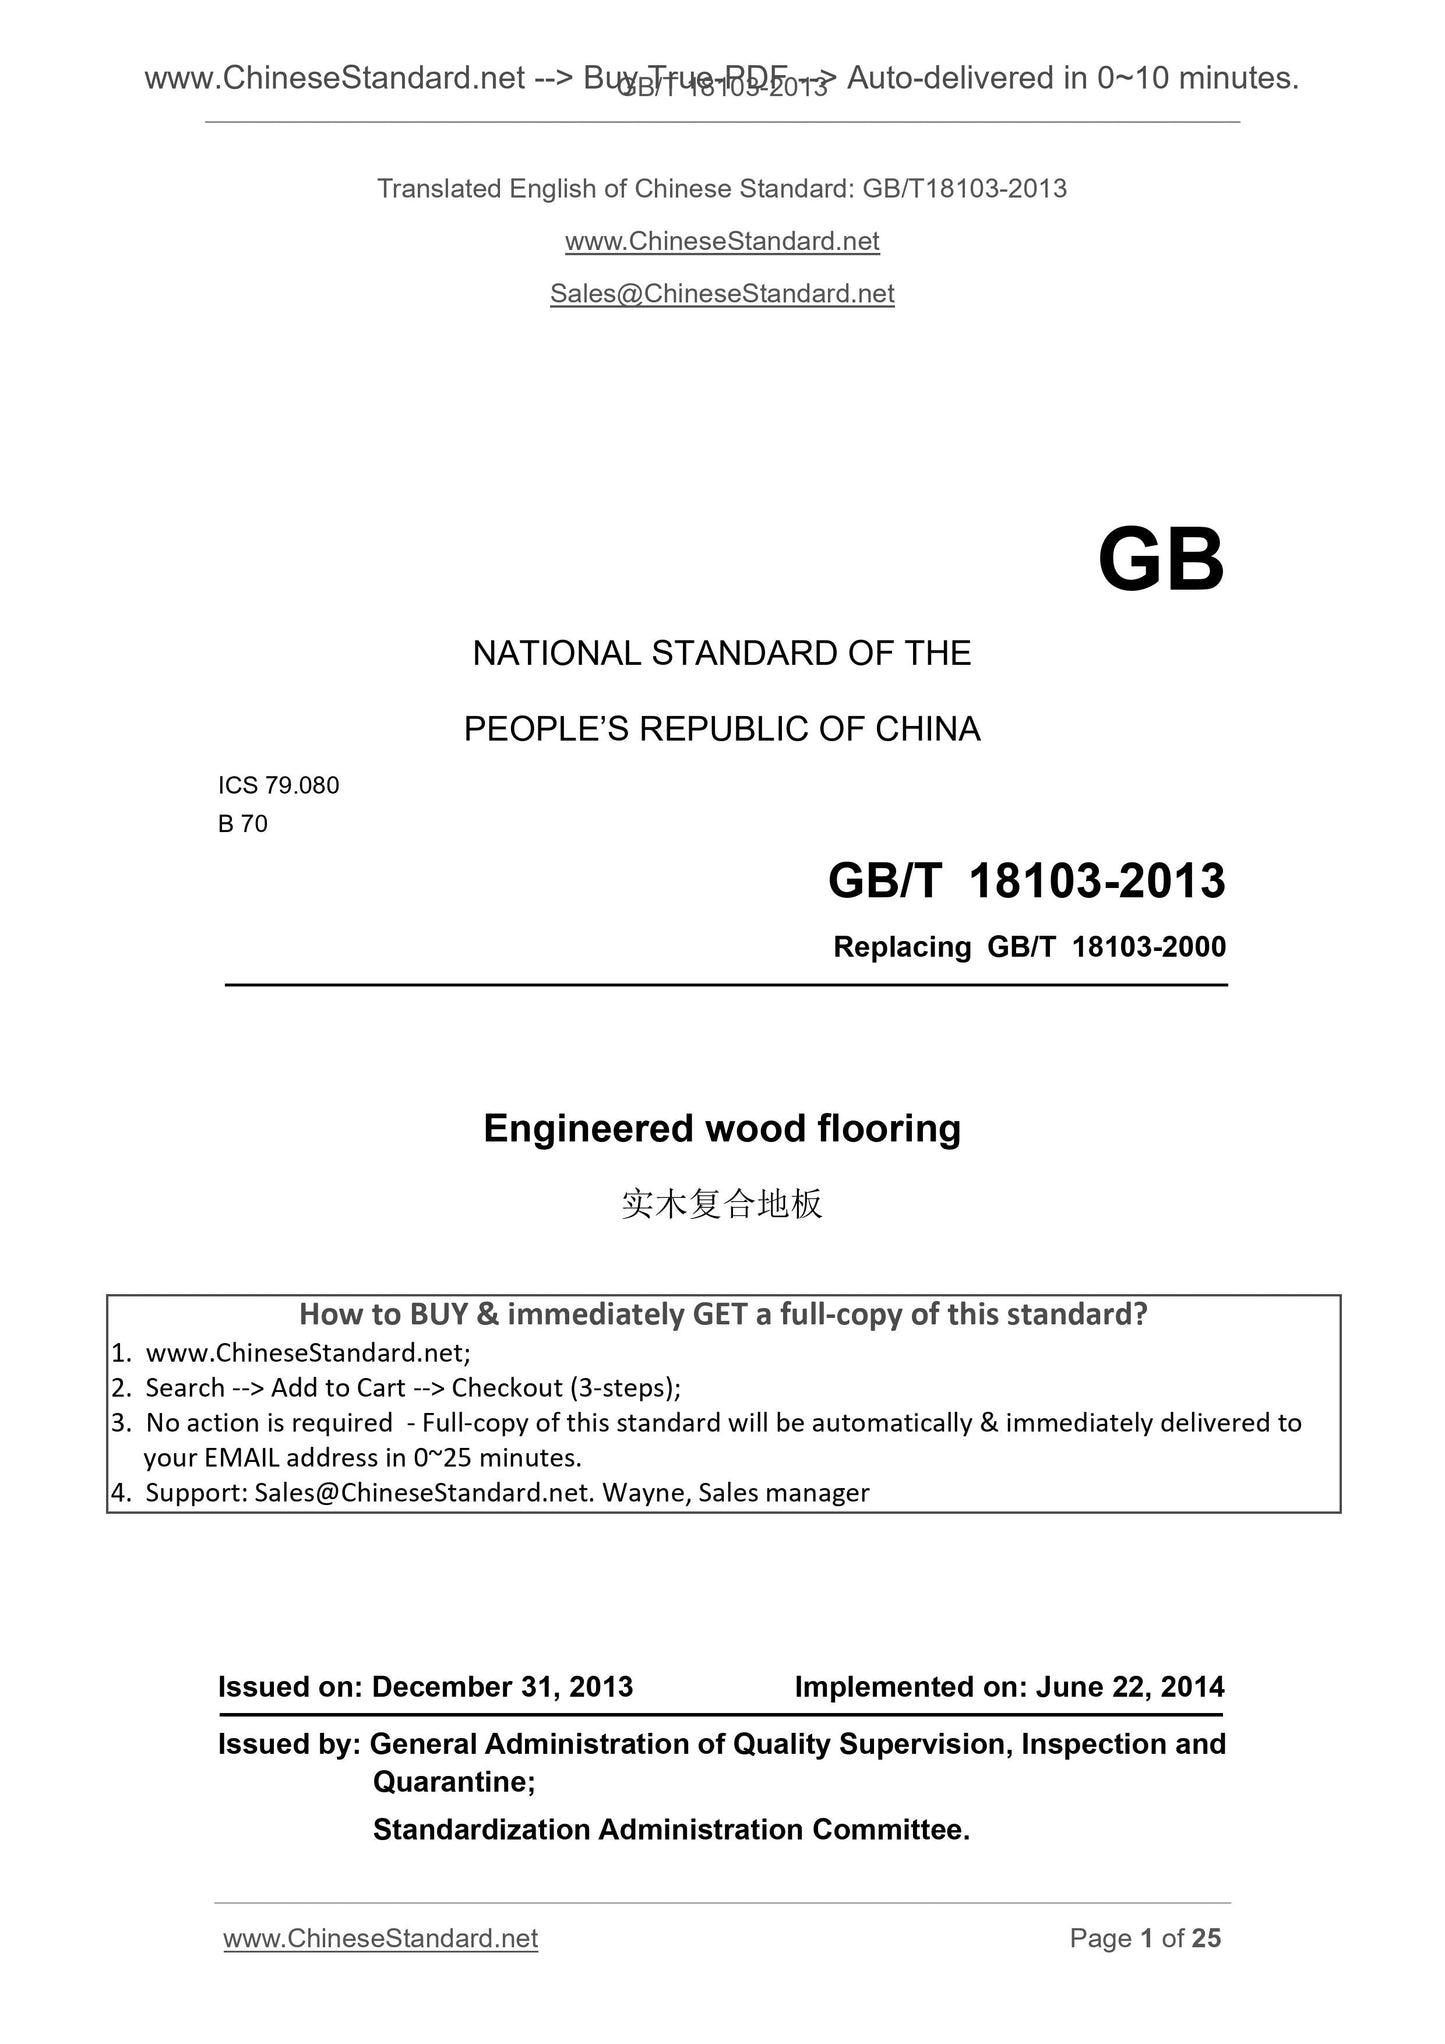 GB/T 18103-2013 Page 1